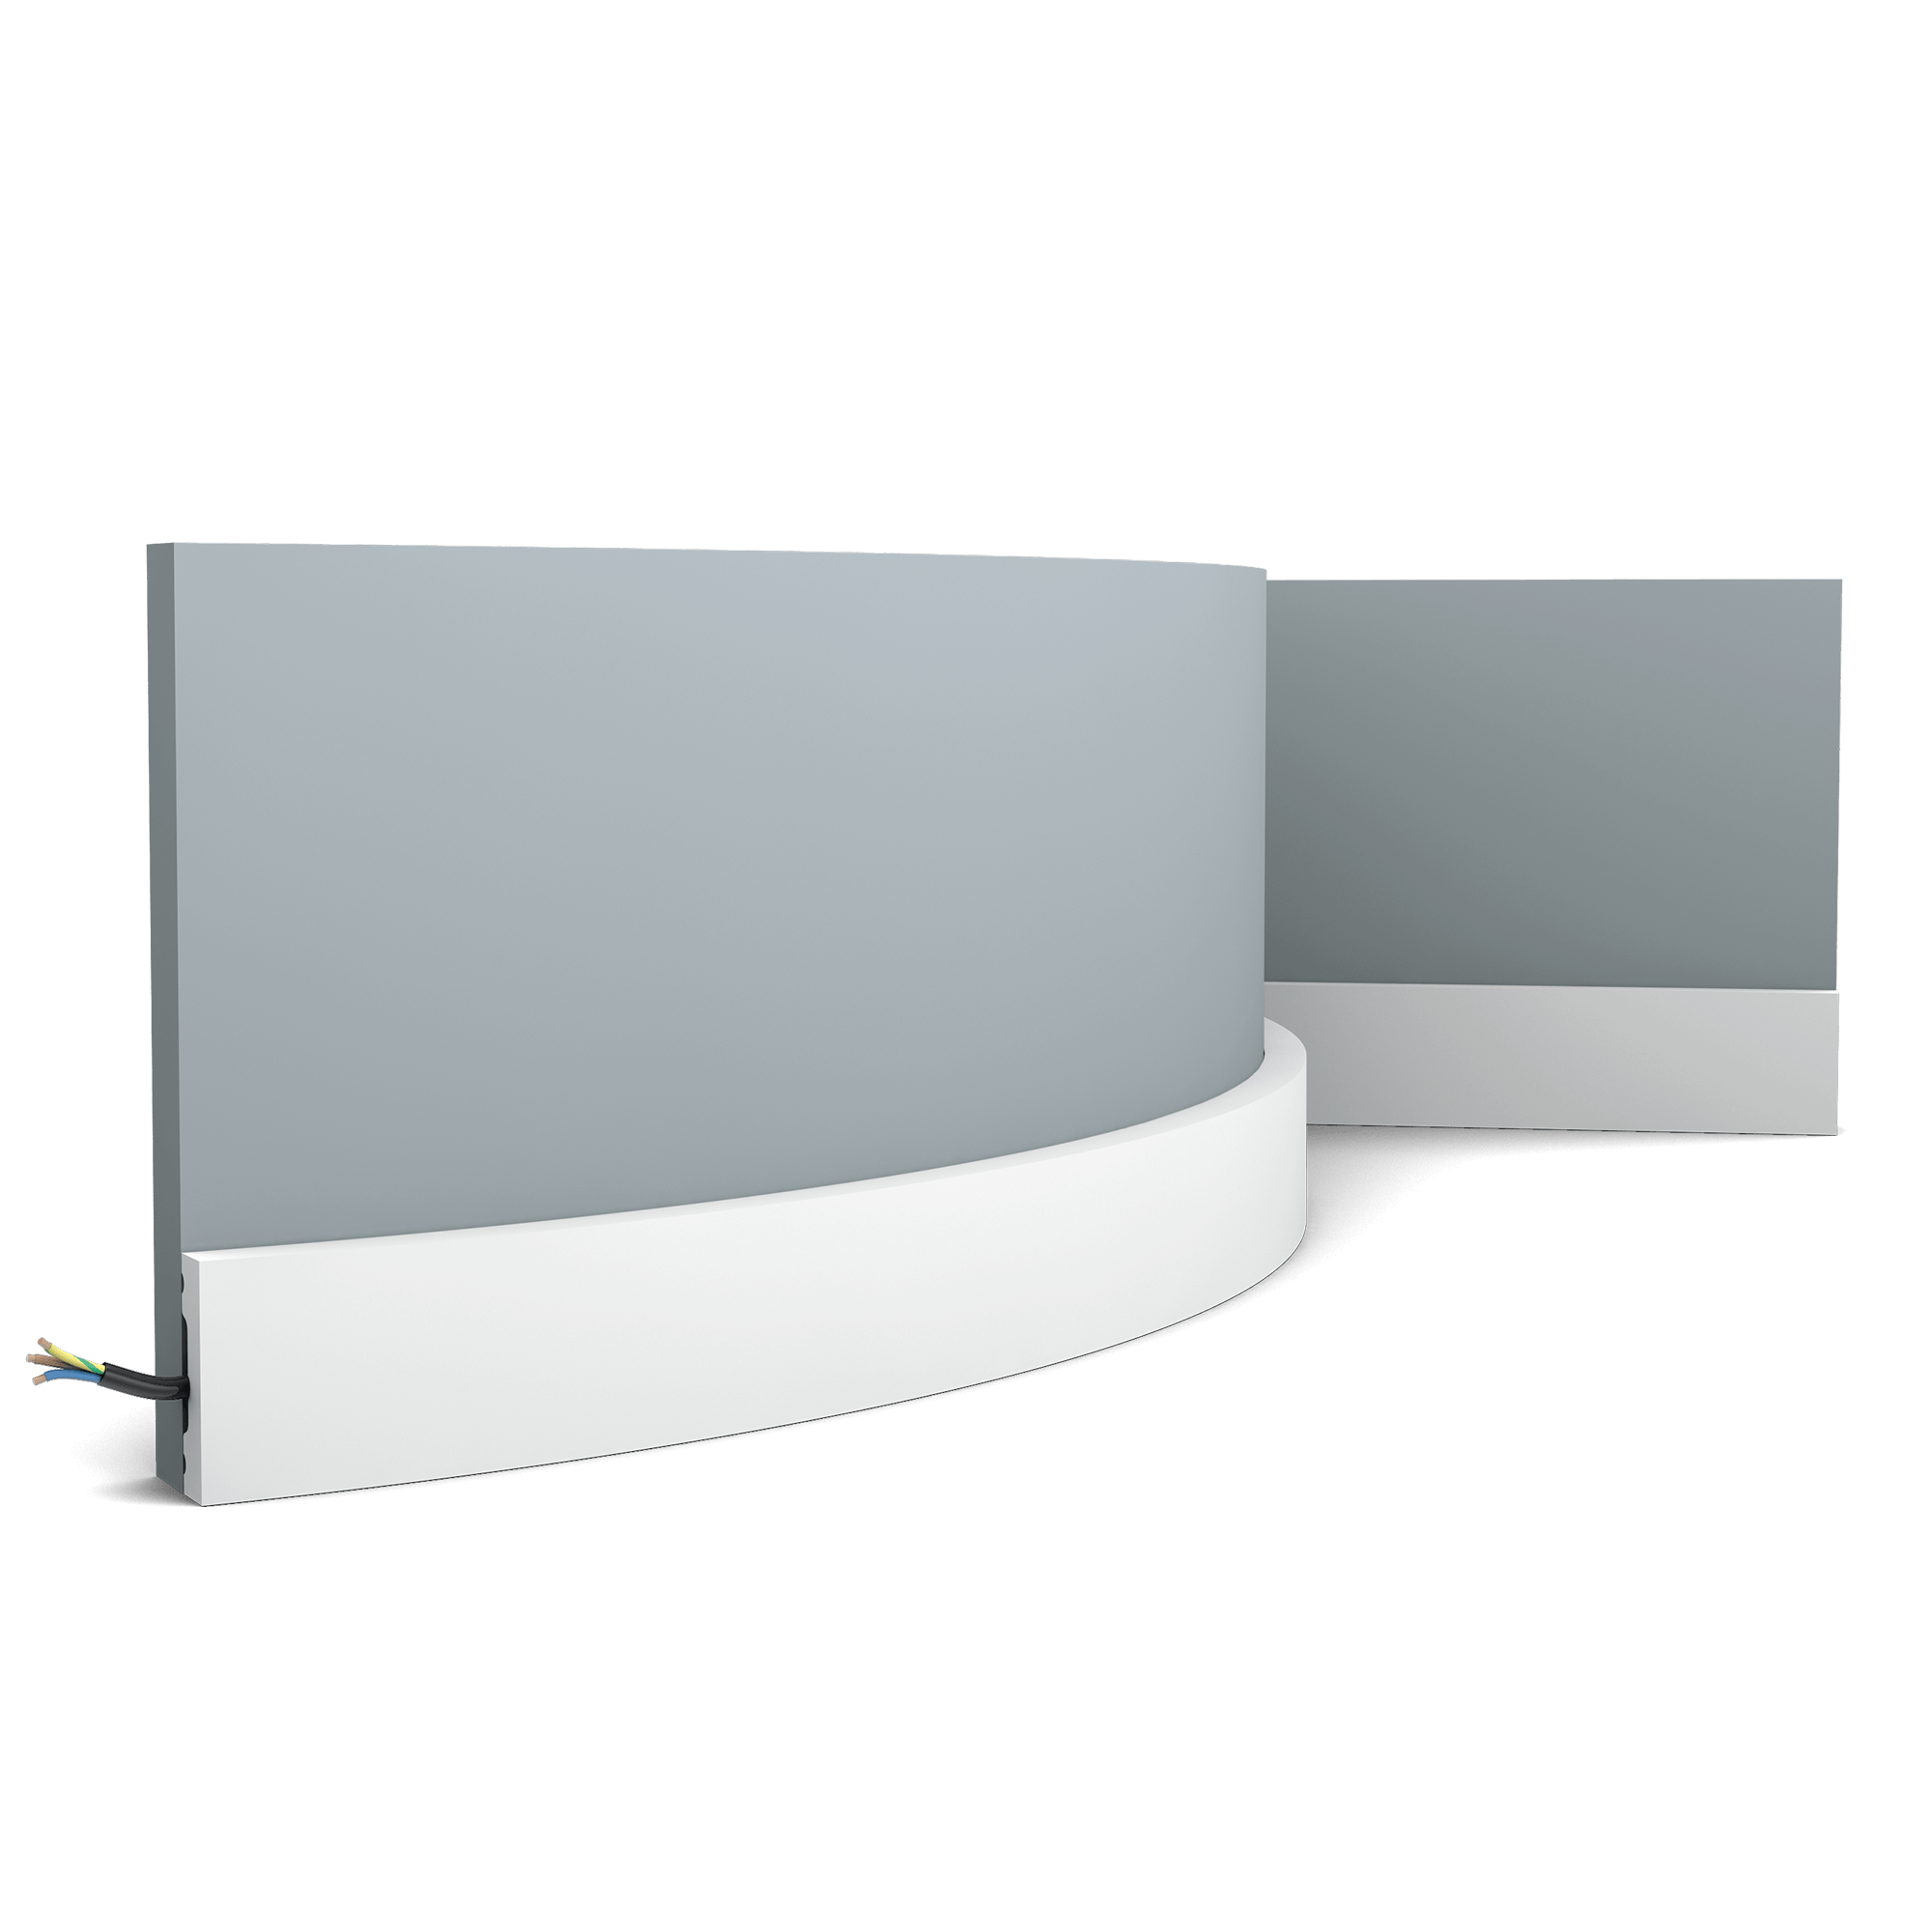 Flexible version of the SX162. Our simplest skirting board is part of the SQUARE family. Thanks to its Flex technology, curved walls and surfaces are no problem. Installation remark: It is necessary to screw this profile on the wall. Flex Radius: R min = 20 cm, R* min = 80 cm